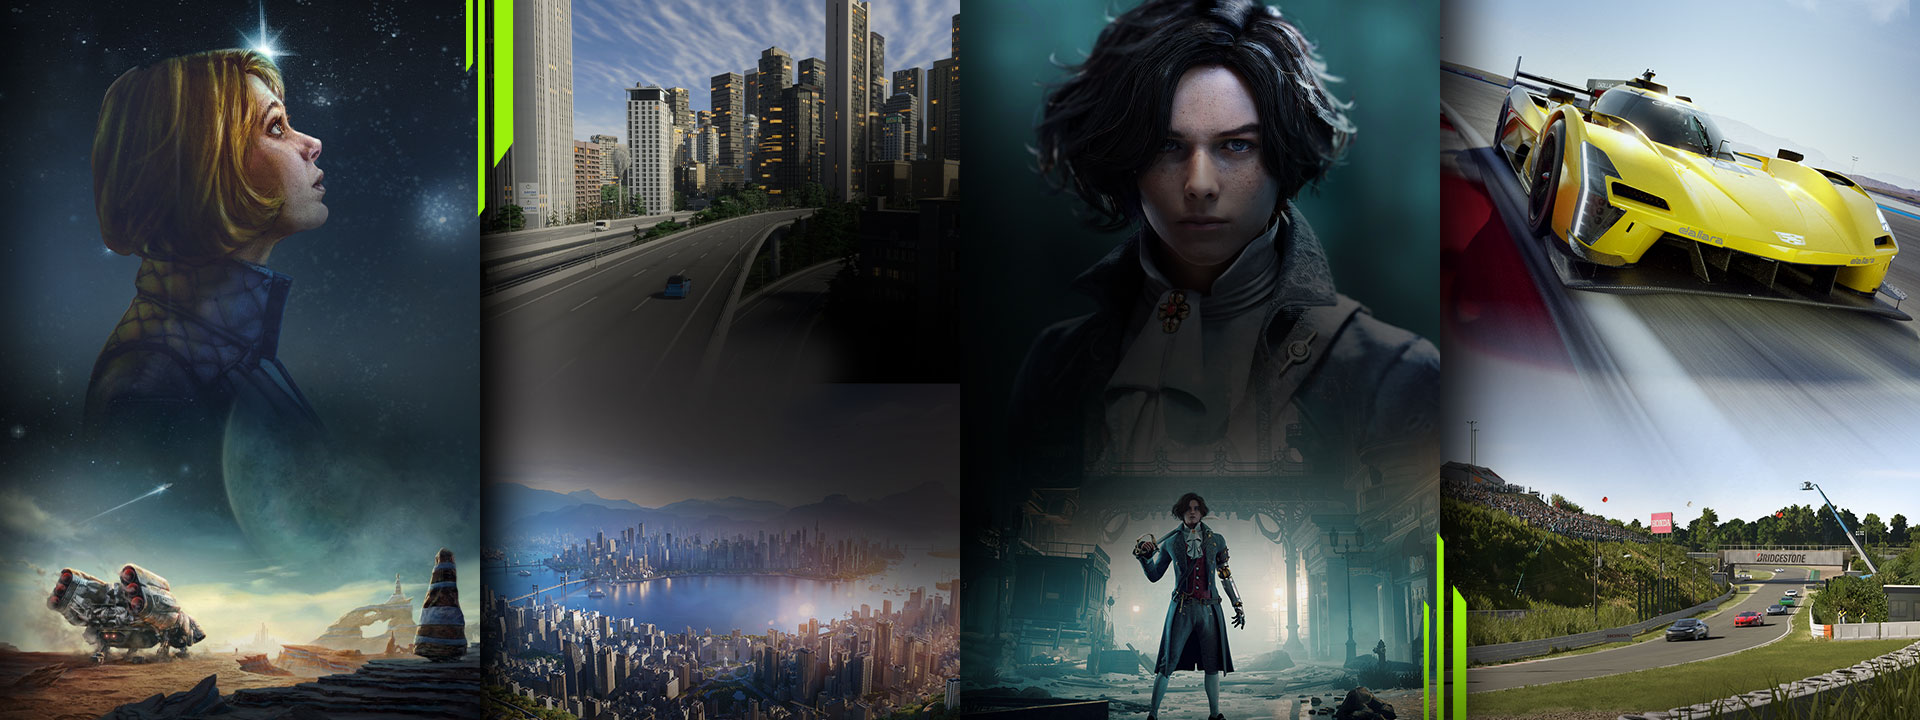 A selection of games available or coming soon with Xbox Game Pass including Starfield, Cities: Skylines II, Lies of P, and Forza Motorsport